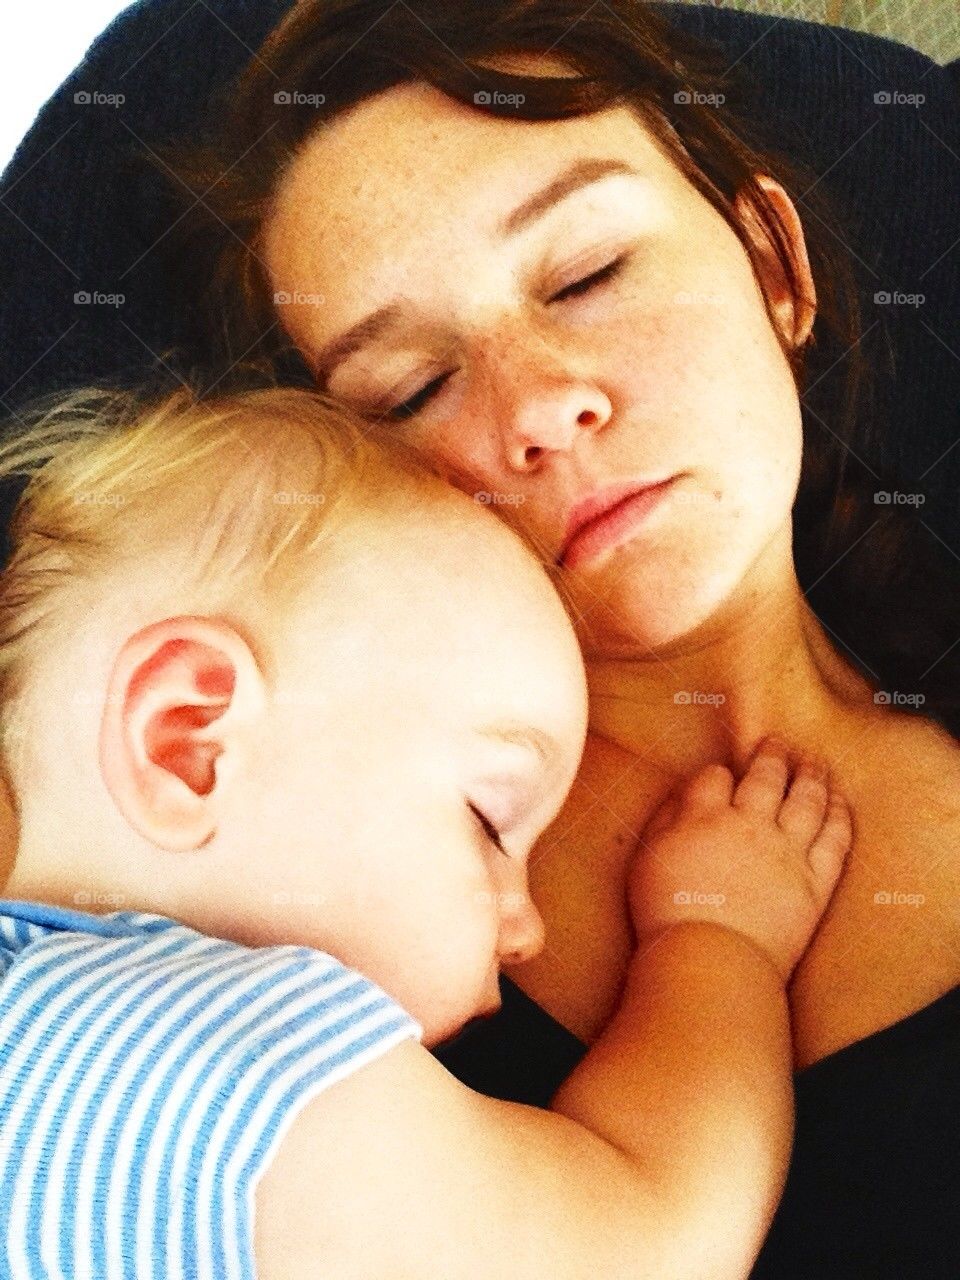 Loving mother and son taking nap!